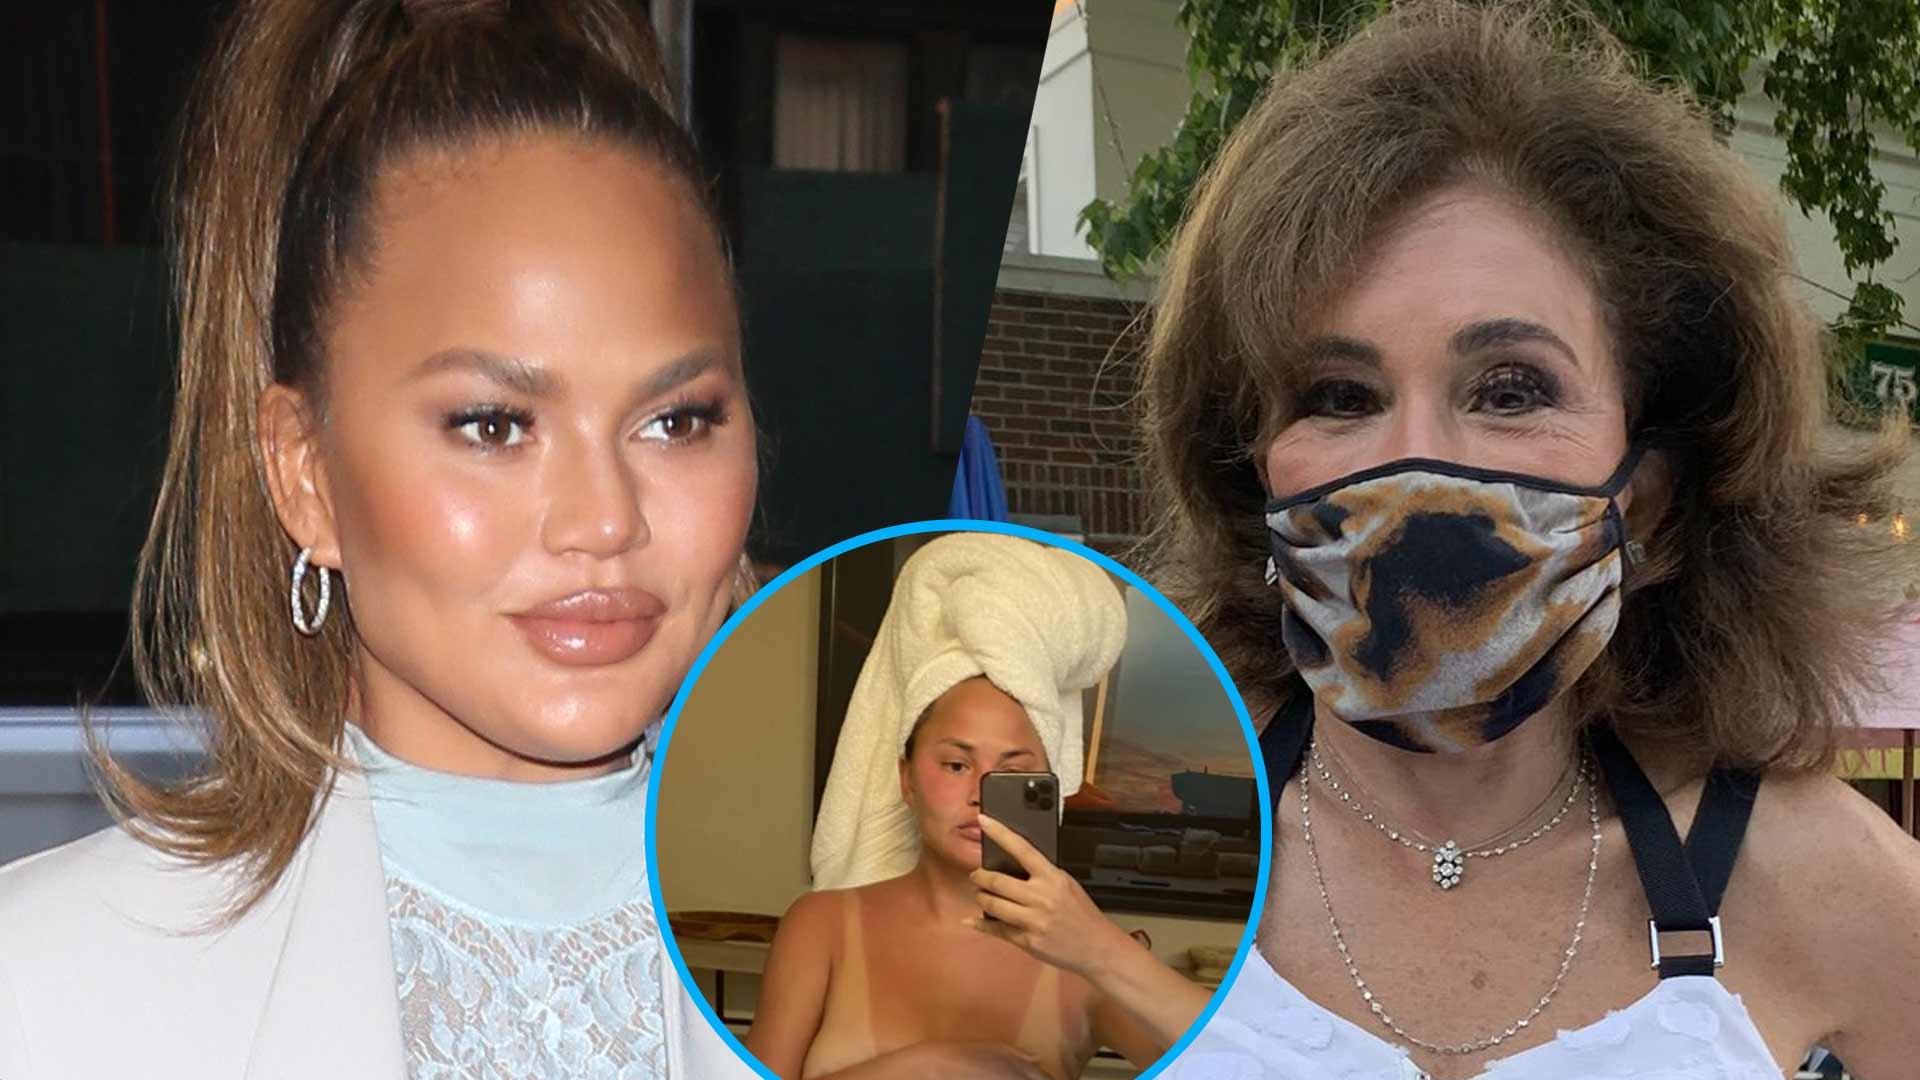 Chrissy Teigen Calls Out Fox News Host Jeanine Pirro For Checking Out Her Cleavage Pic